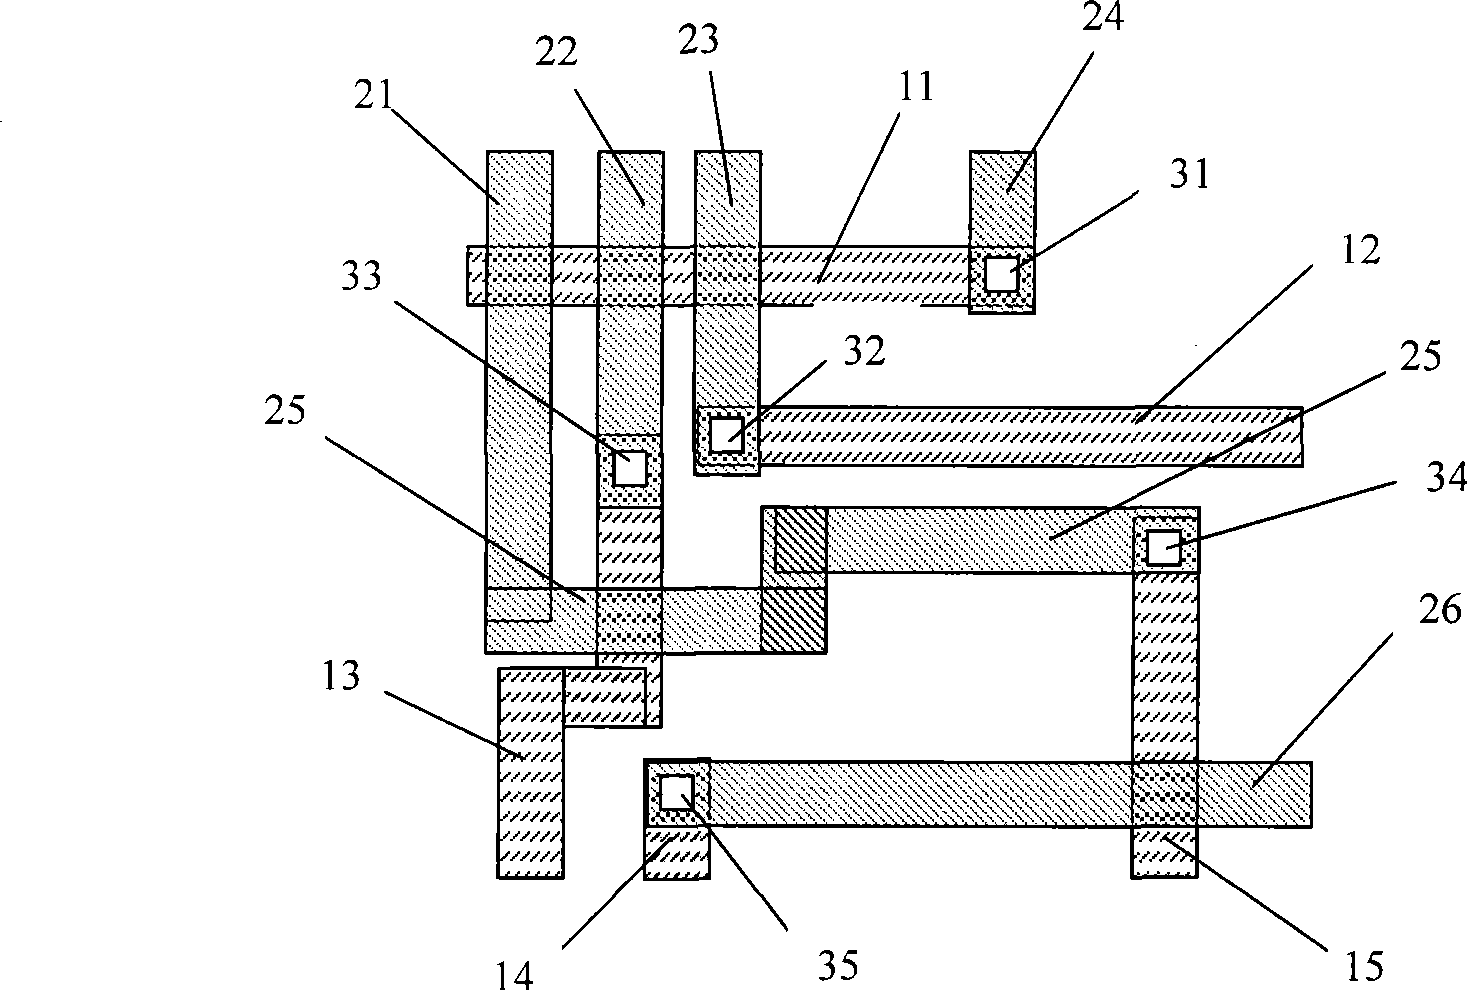 OPC correcting method for forming auxiliary through hole